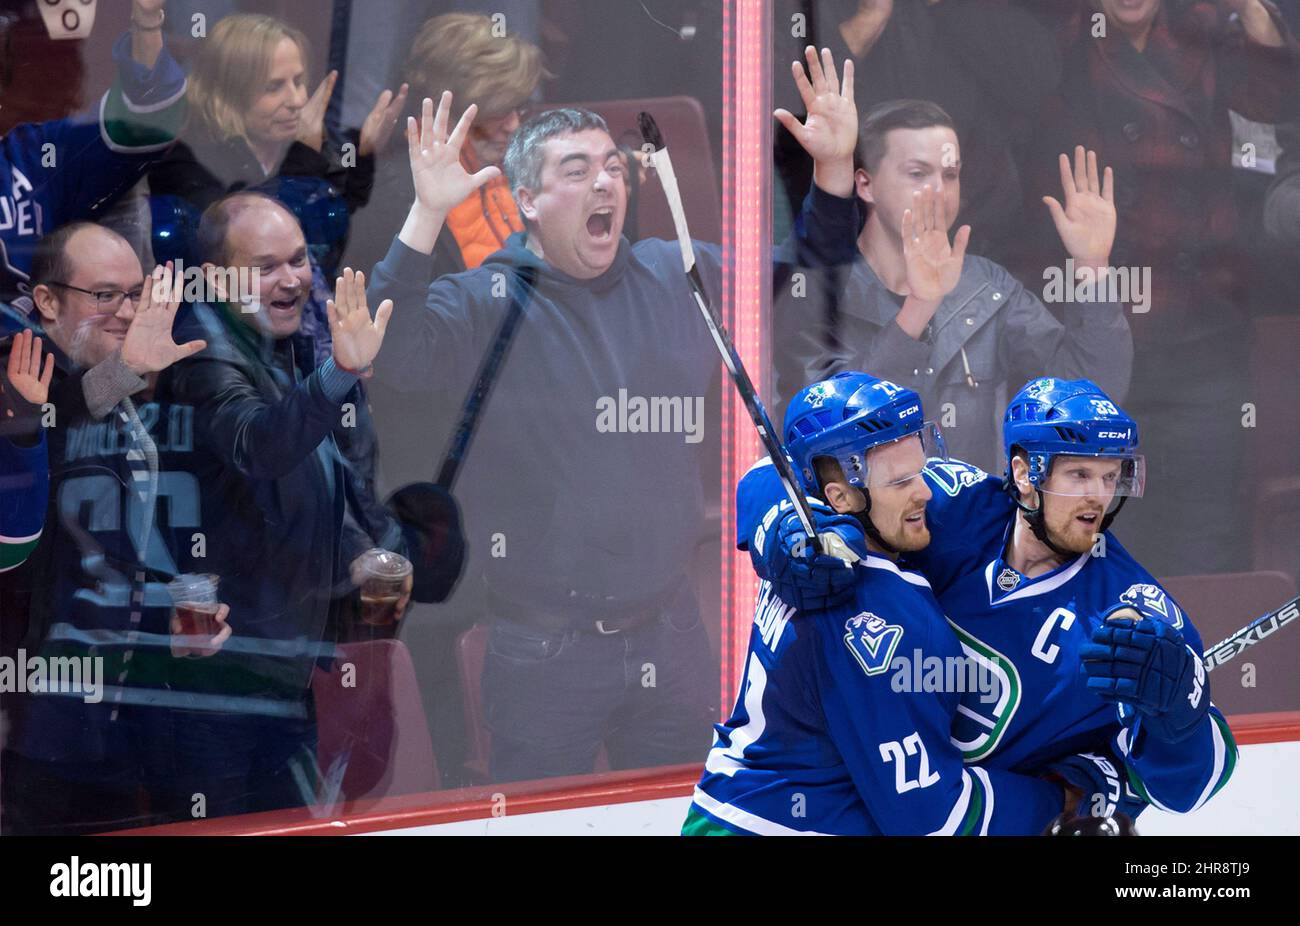 The Vancouver Canucks' Henrik Sedin, right, of Sweden, celebrates with his twin brother Daniel following Daniel's goal against the New York Rangers during third period NHL hockey action, in Vancouver, on Wednesday, Dec. 9, 2015. Two years ago under John Tortorella, the Vancouver Canucks' superstars had one of their worst seasons in recent memory, but the twins are back putting up big numbers this season. THE CANADIAN PRESS/Darryl Dyck Stock Photo